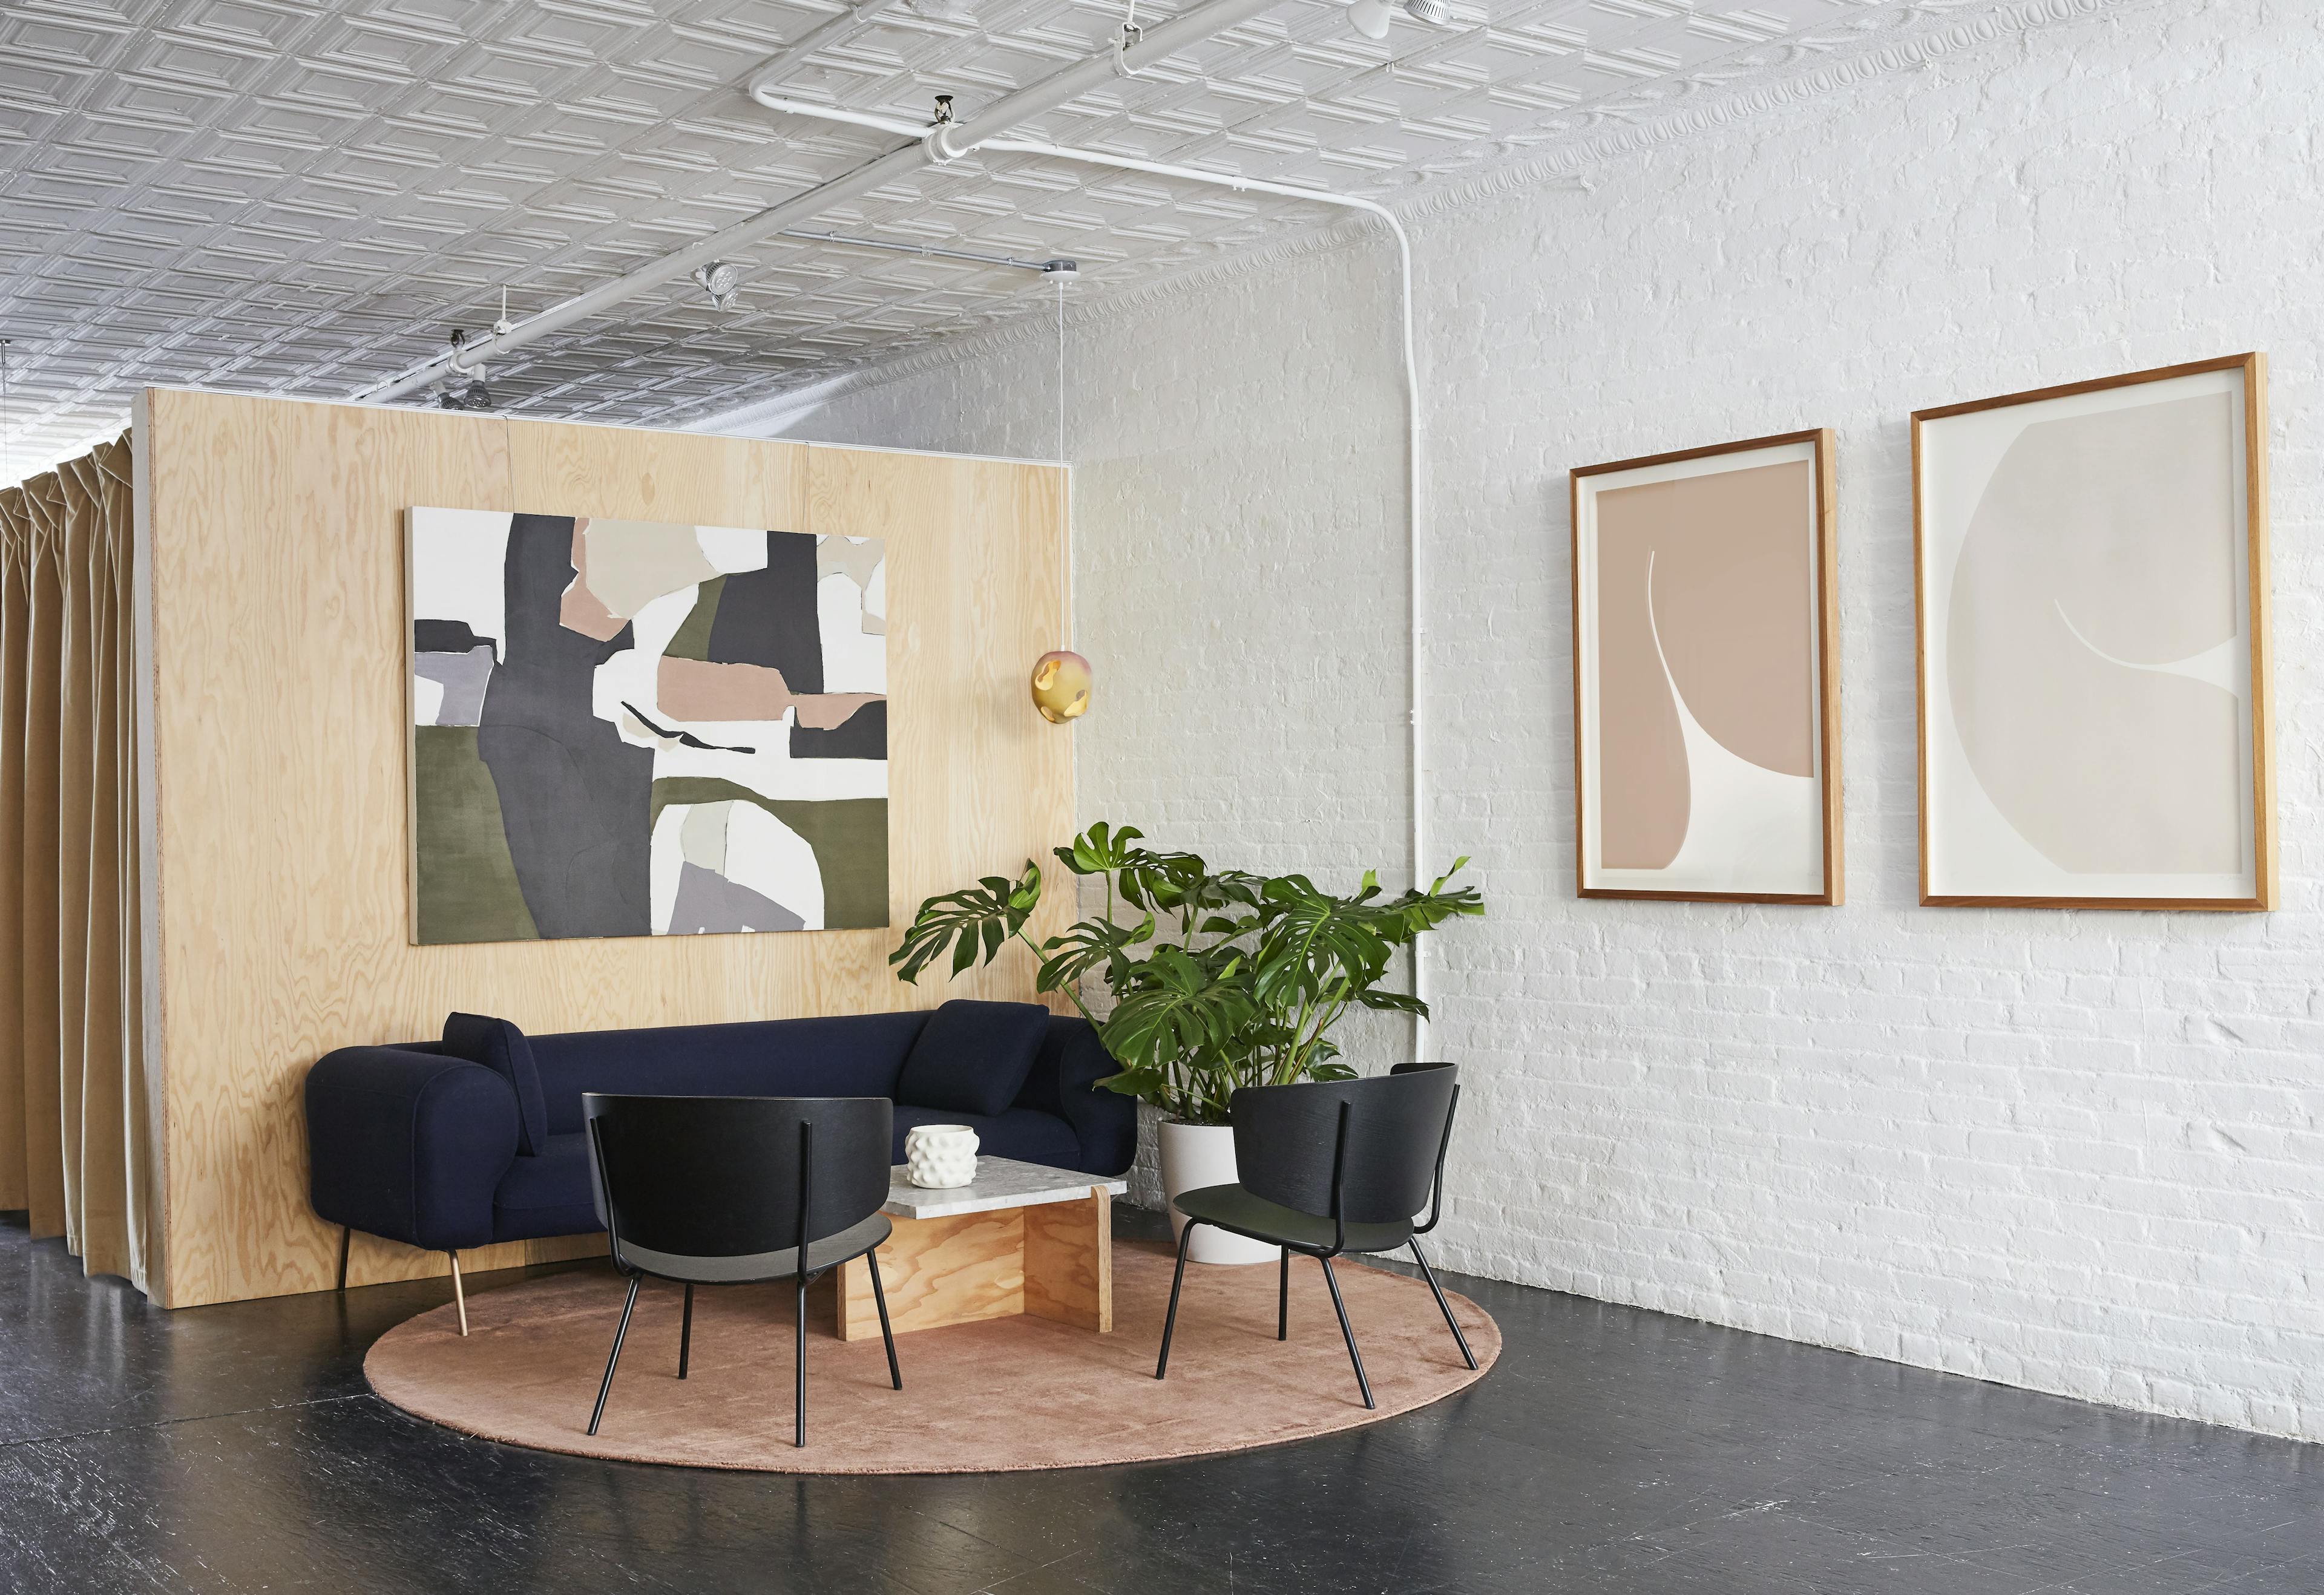 A wood wall intersects a white brick wall to create the lounge area at Uprise Art, complete with a navy couch and black chairs on a red circular rug.